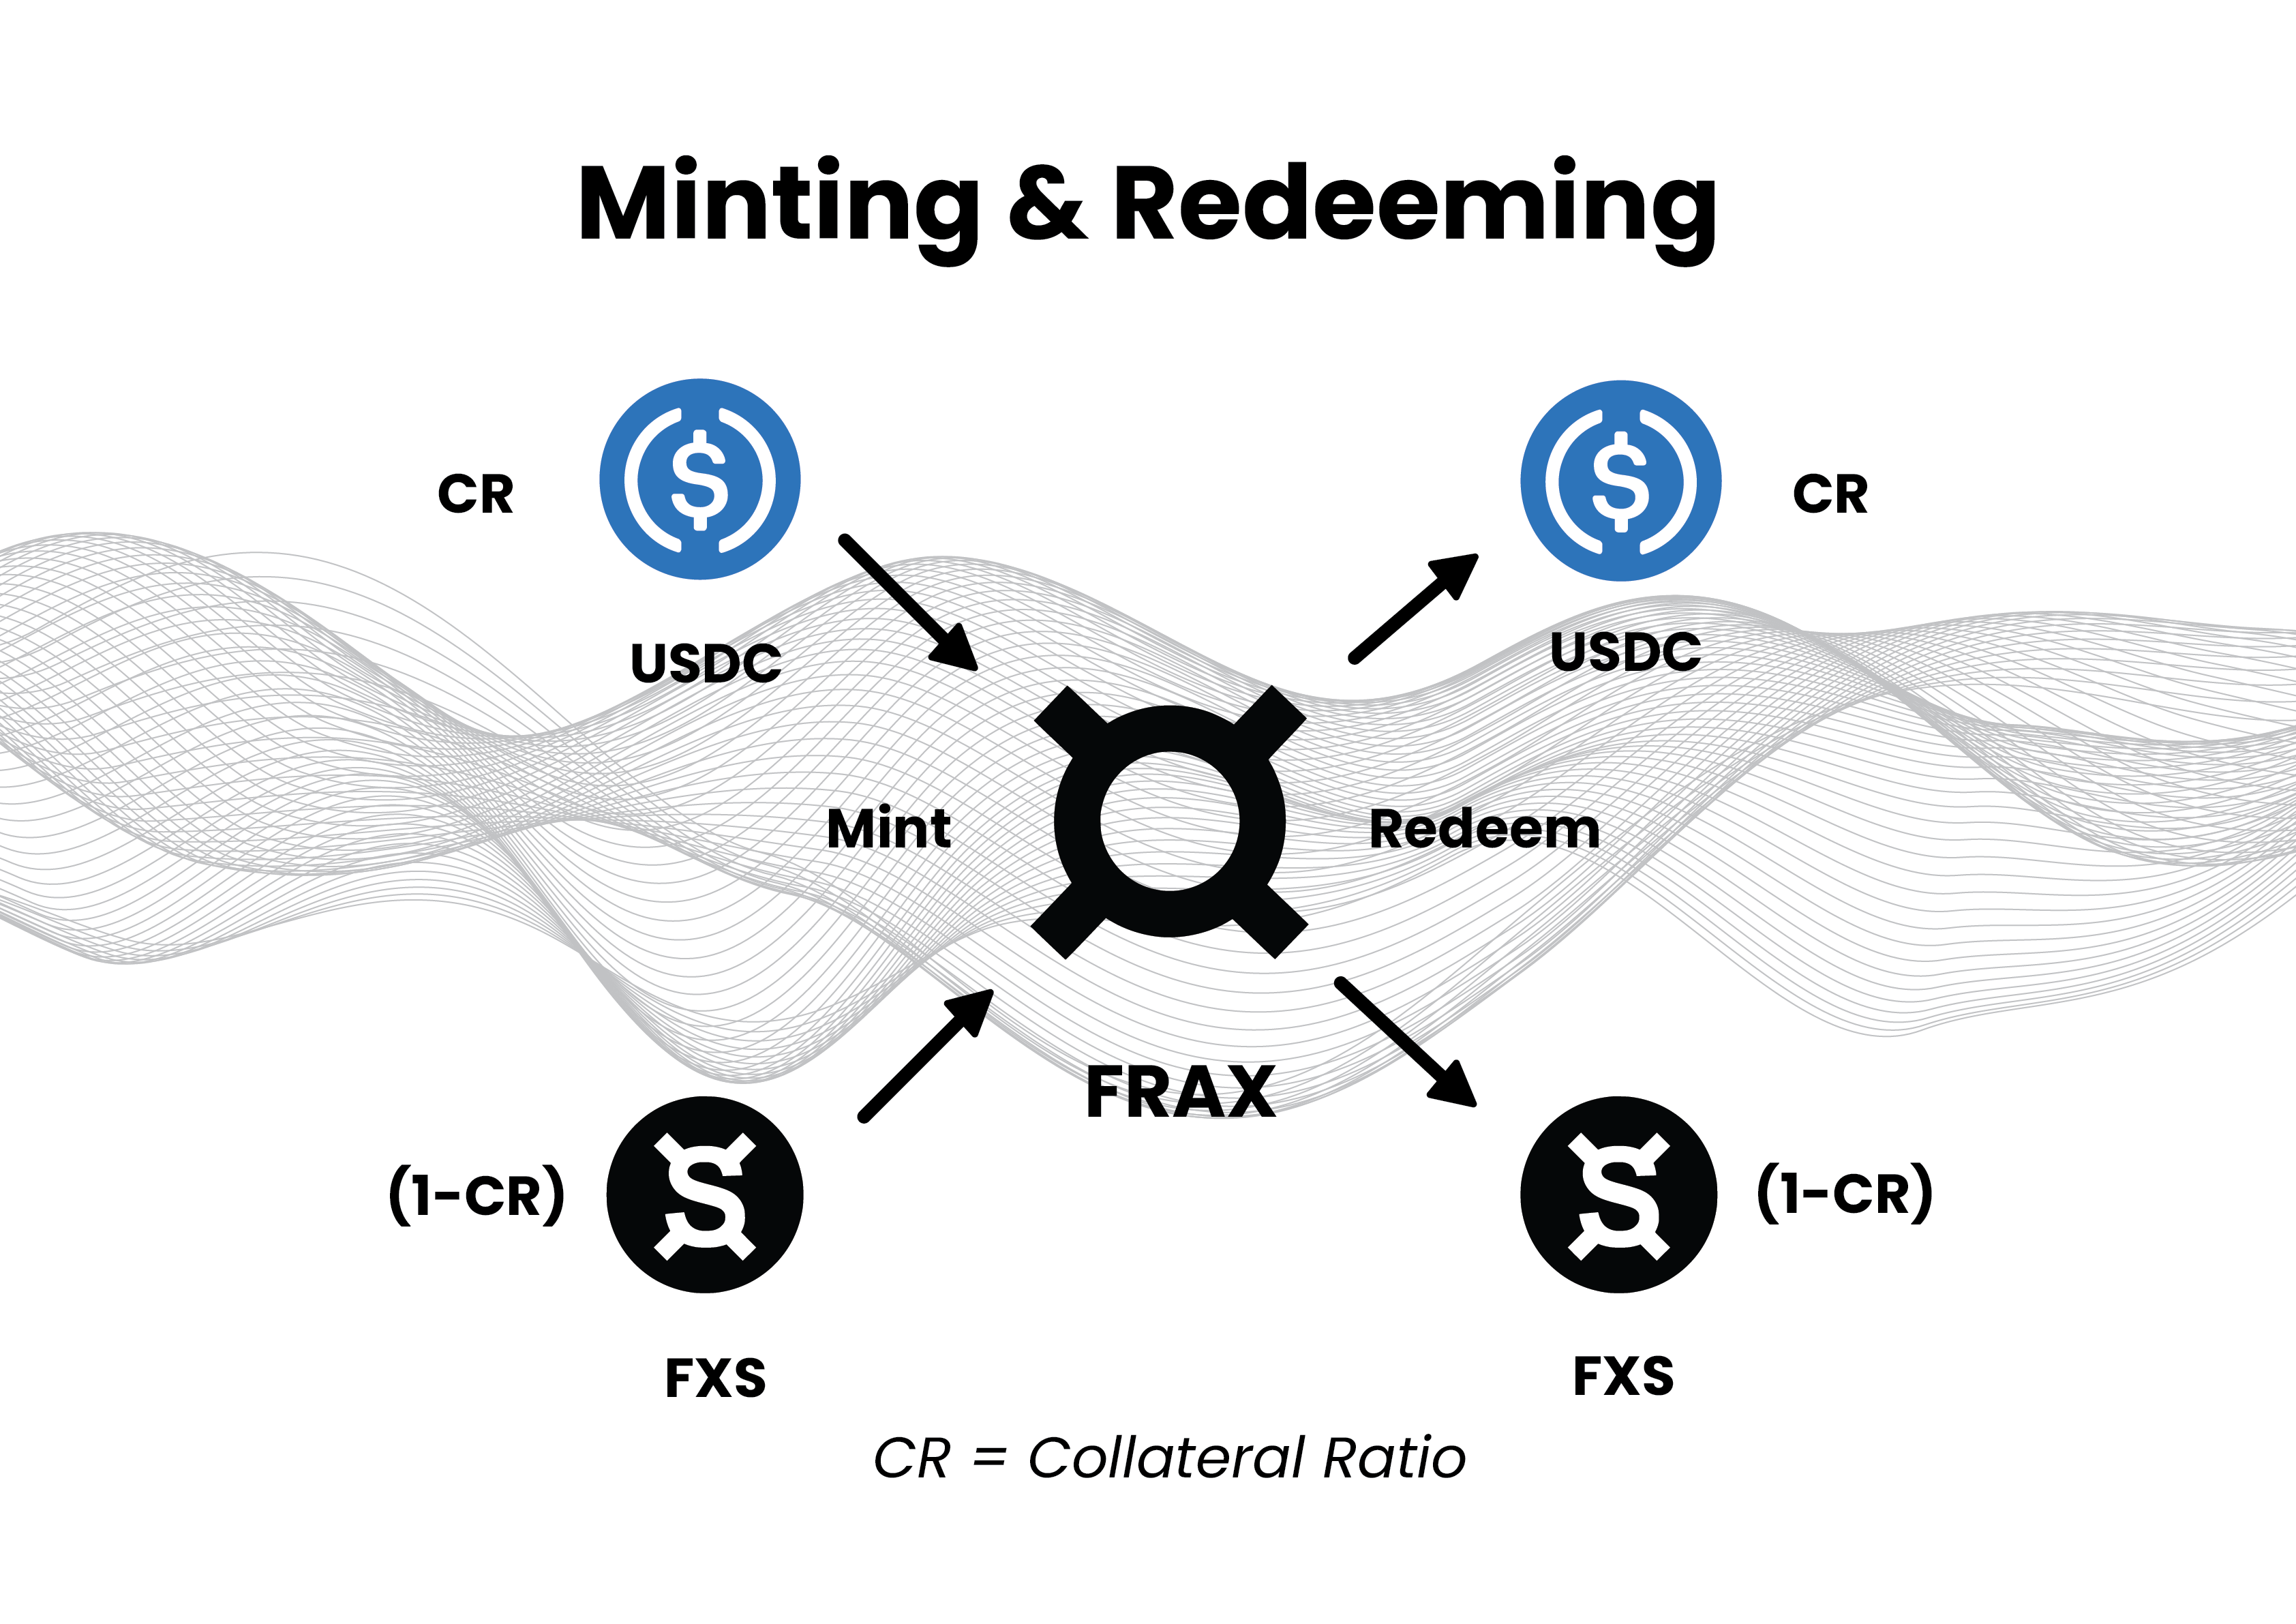 The relationship between collateral ratio (CR) and minting/redeeming $FRAX